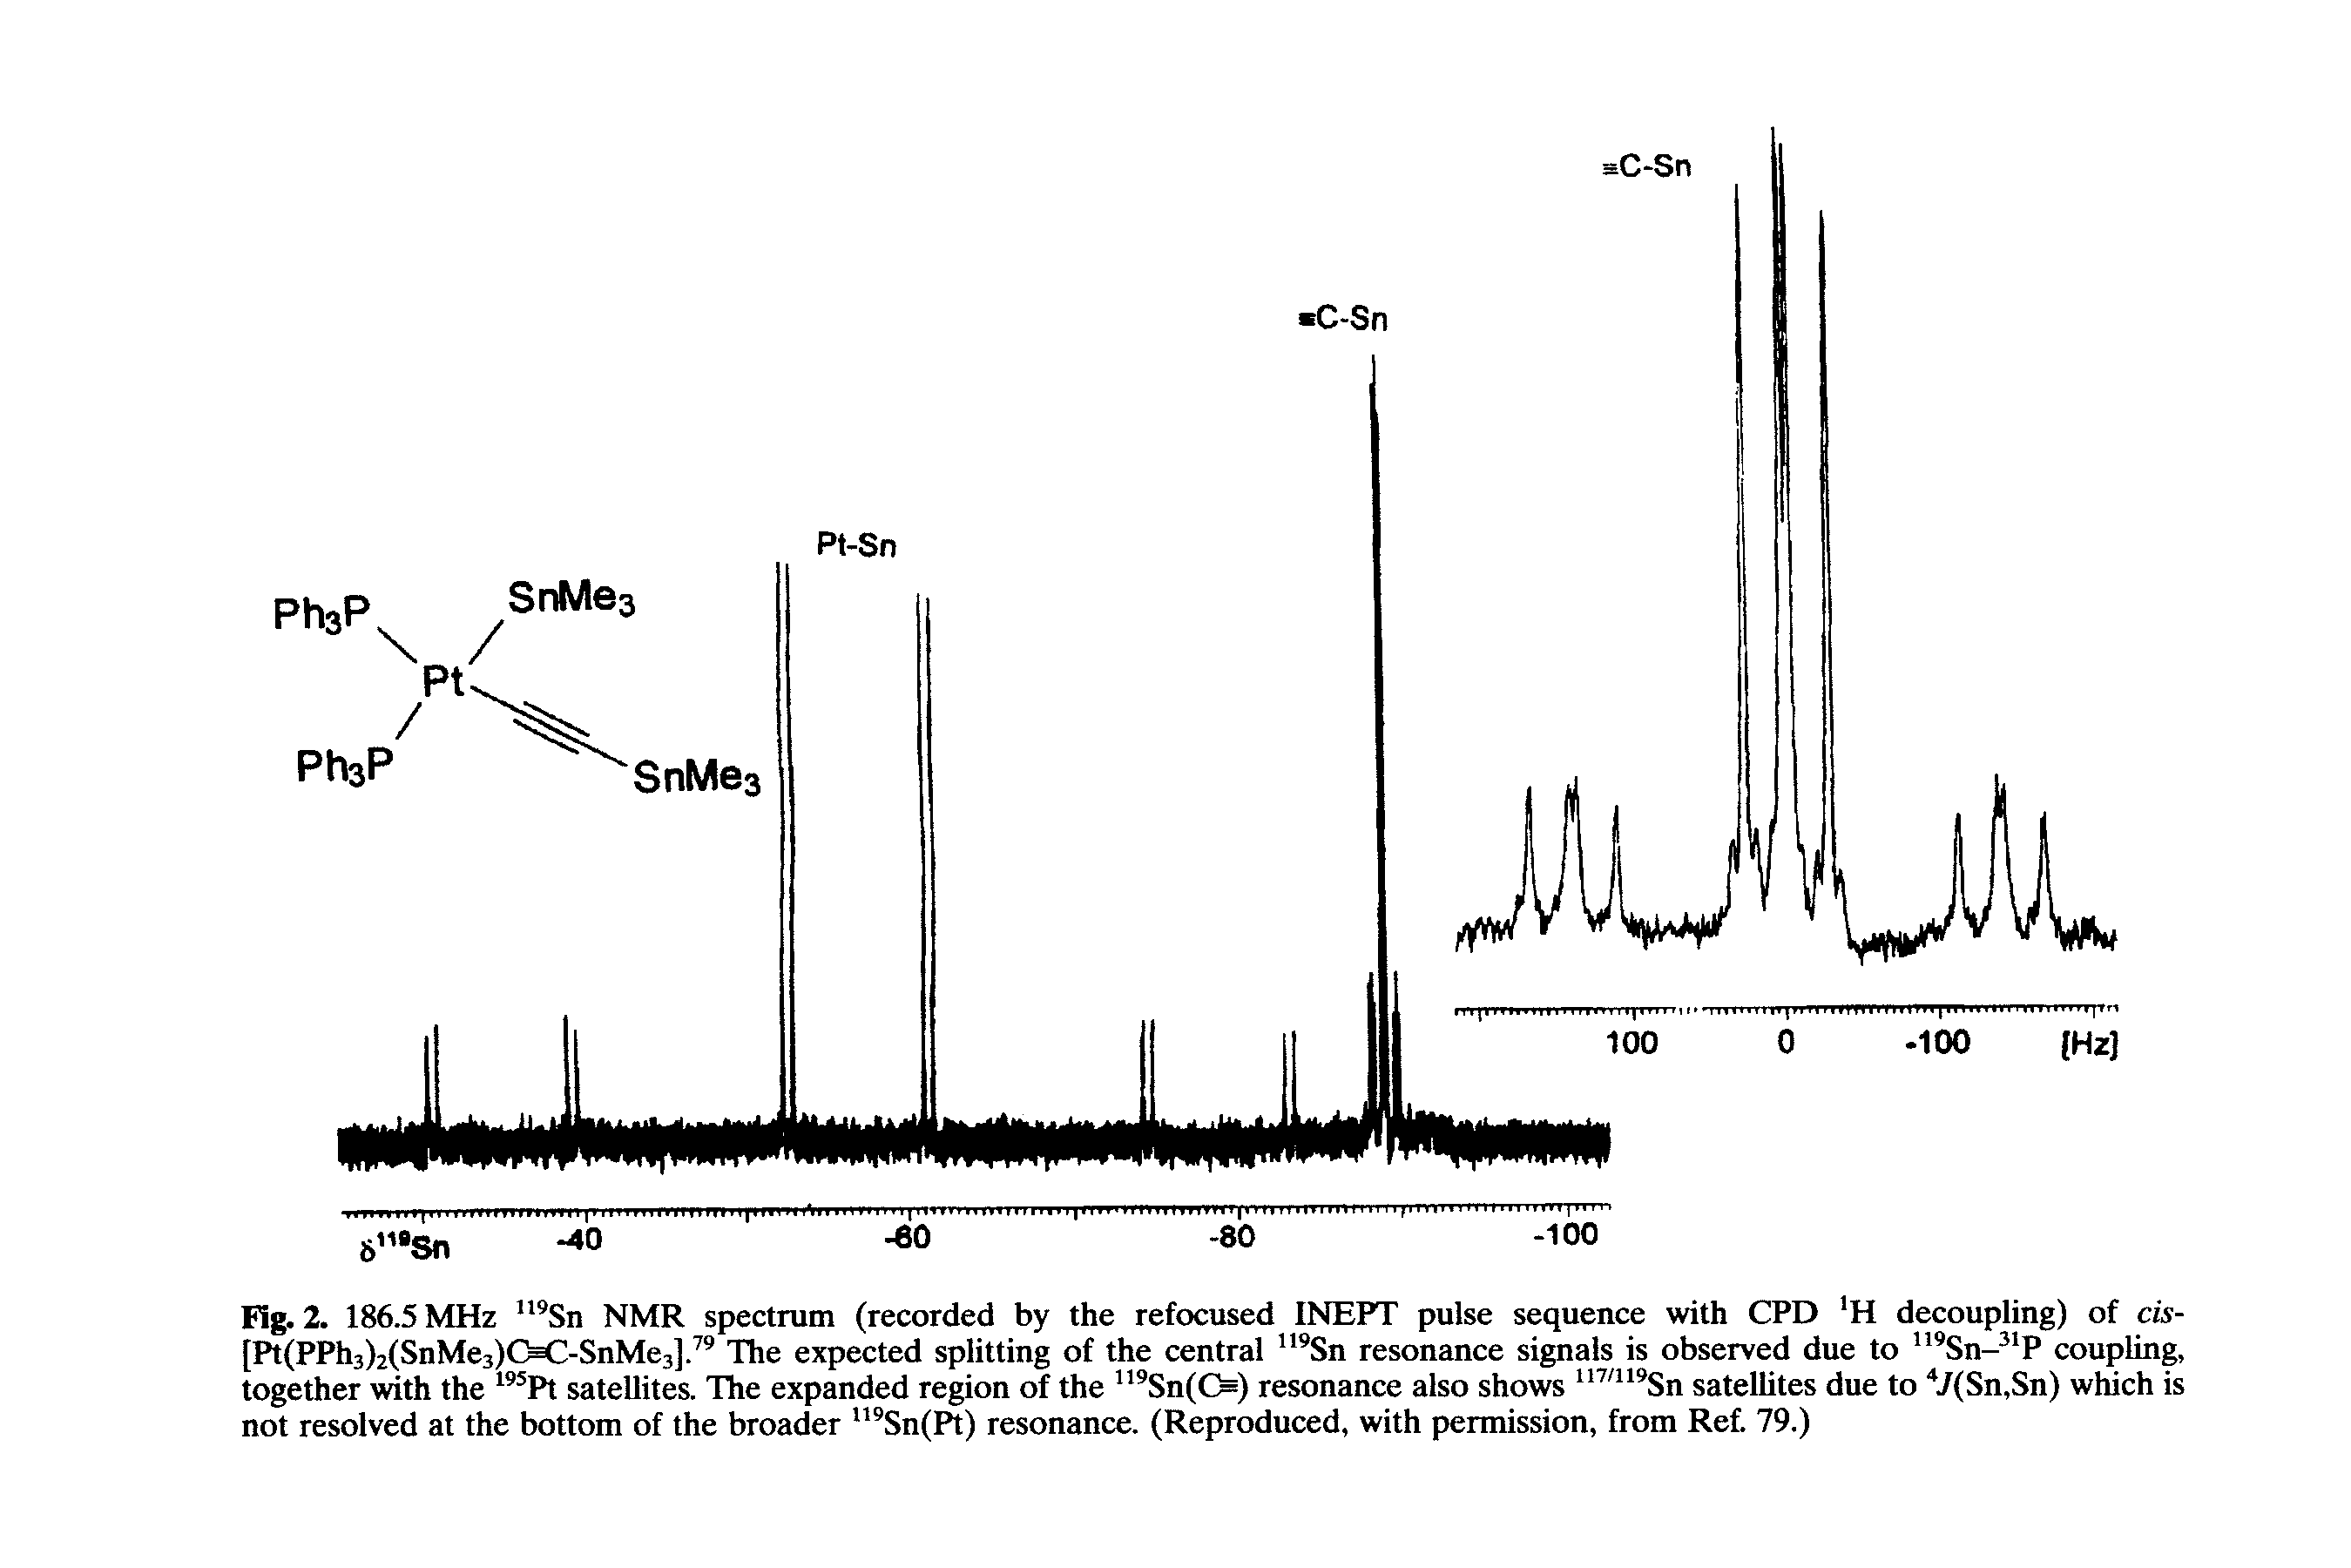 Fig. 2. 186.5 MHz NMR spectrum (recorded by the refocused INEPT pulse sequence with CPD H decoupling) of cis-[Pt(PPh3)2(SnMe3)OC-SnMe3]. The expected splitting of the central " Sn resonance signals is observed due to Sn- P coupling, together with the Pt satellites. The expanded region of the Sn(0) resonance also shows satellites due to 7(Sn,Sn) wWch is...